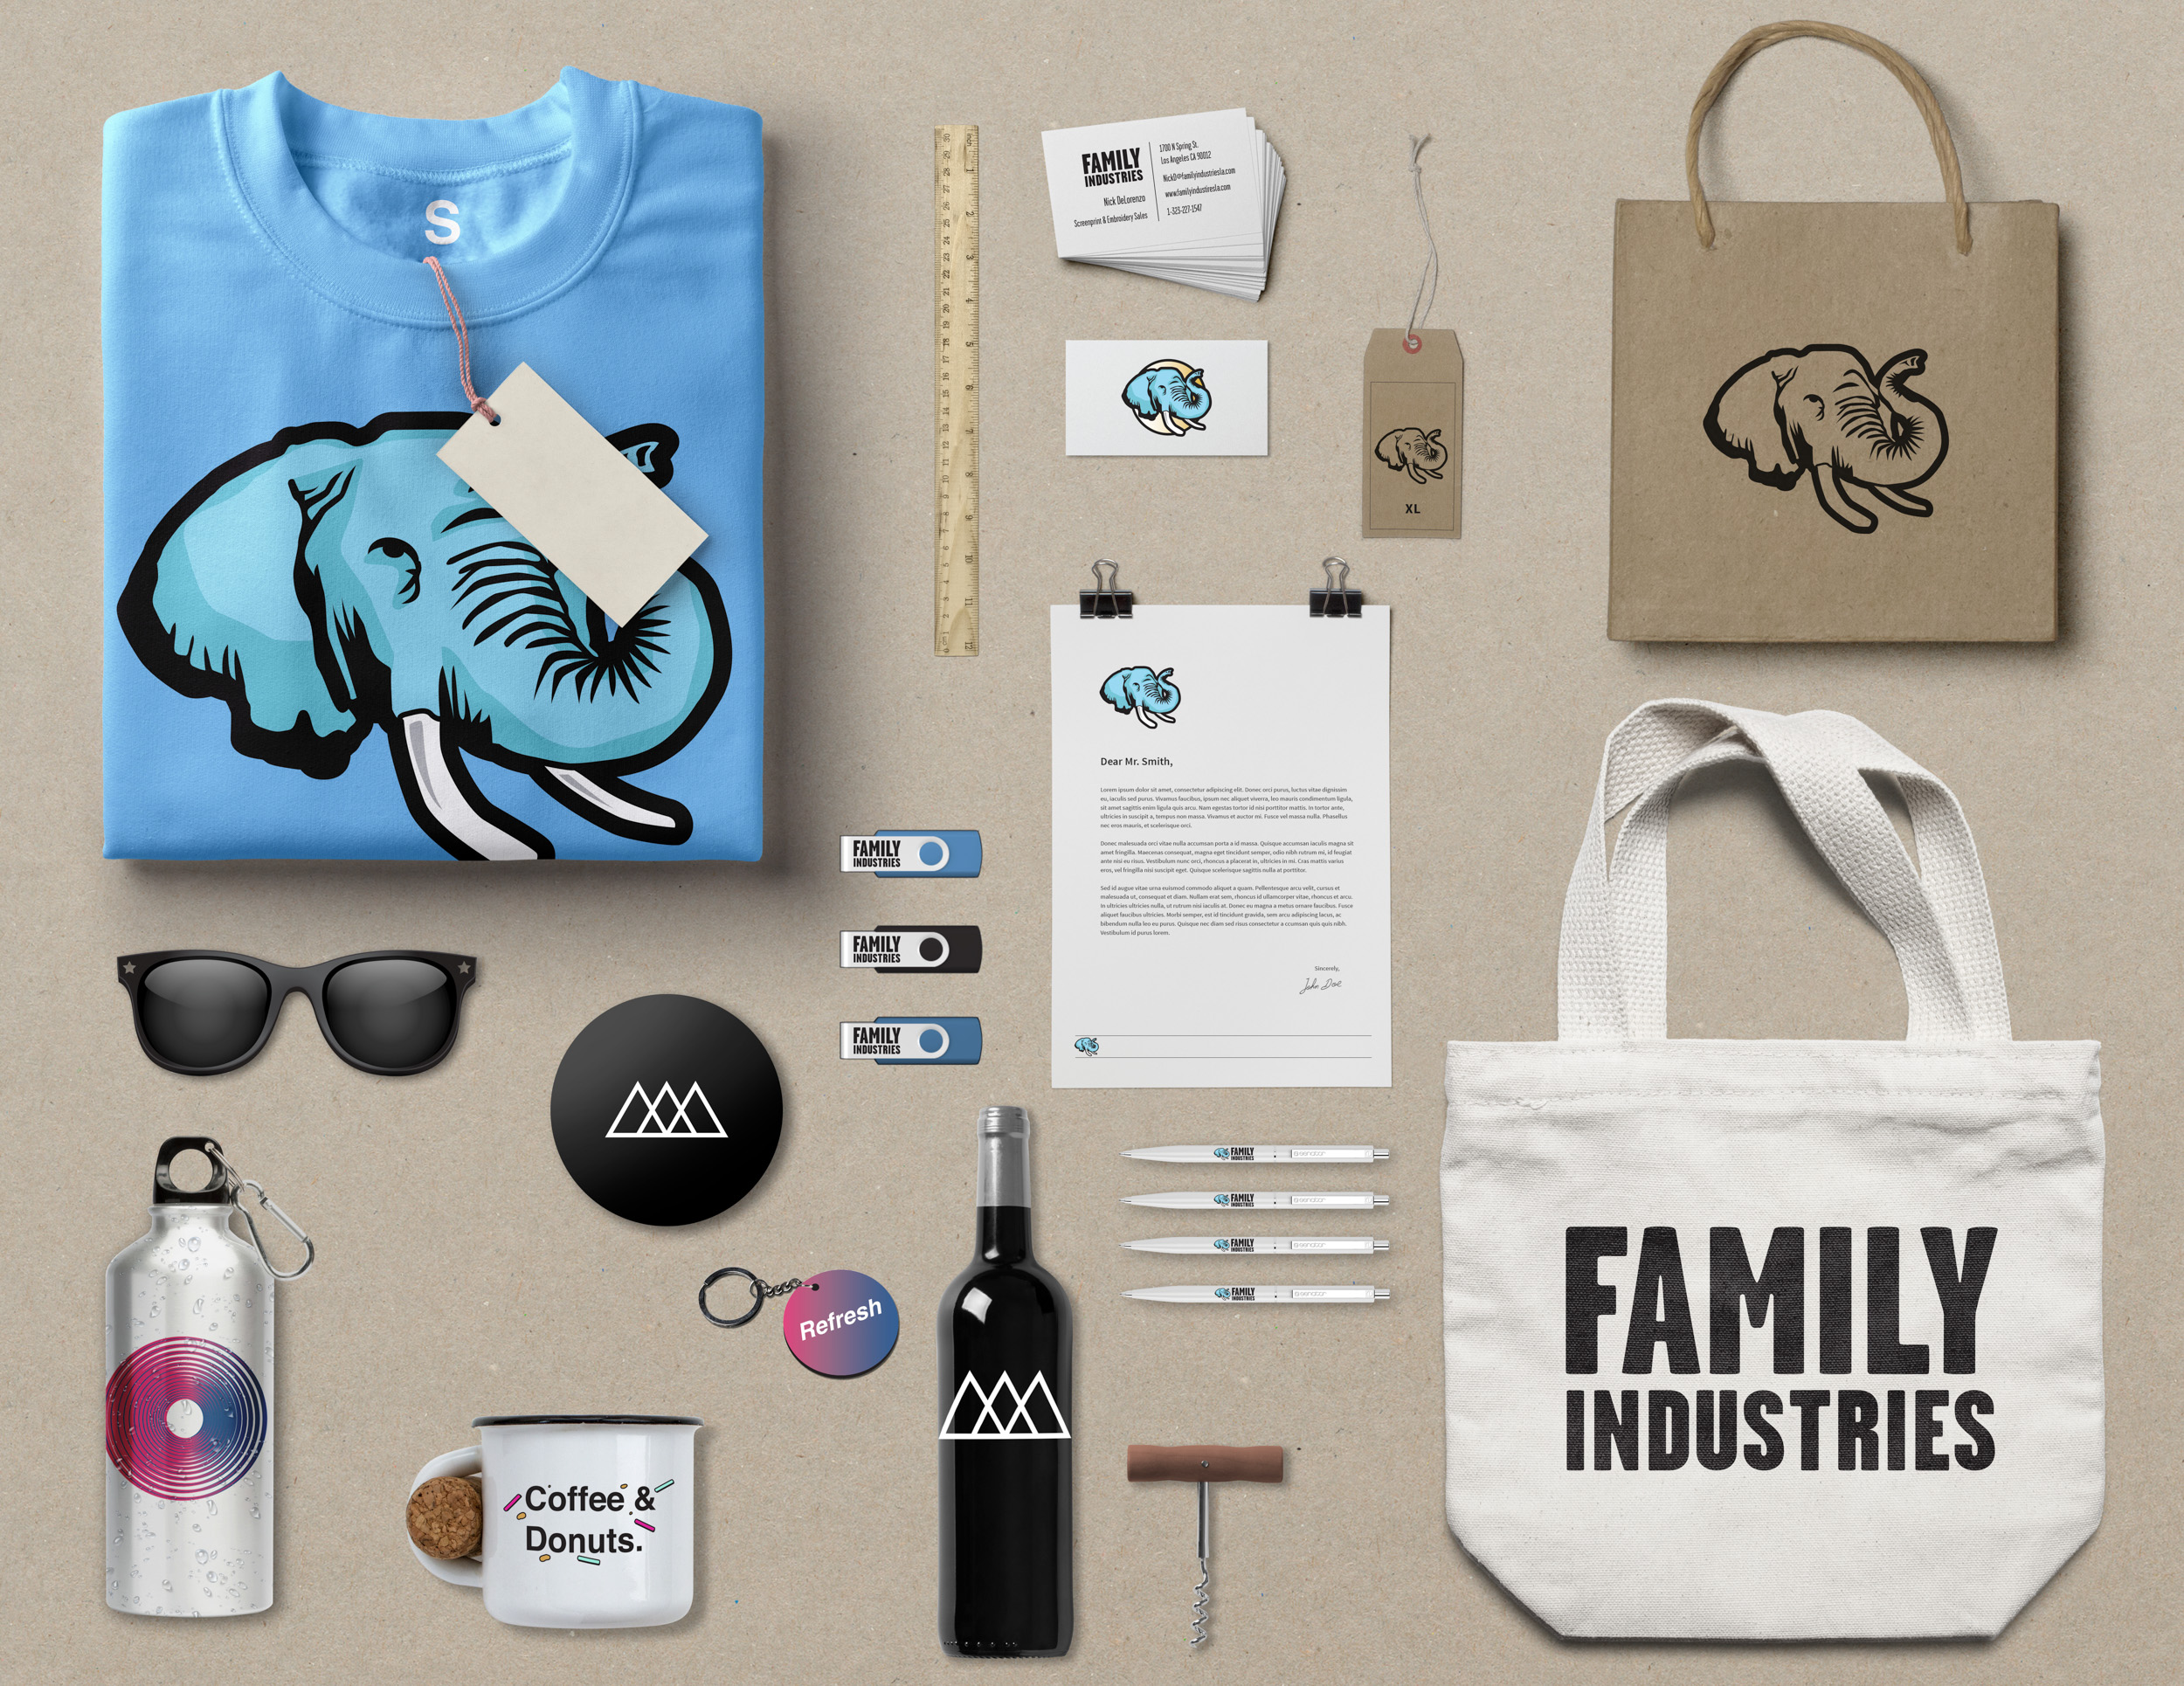 FAMILY INDUSTRIES — Promotional Items